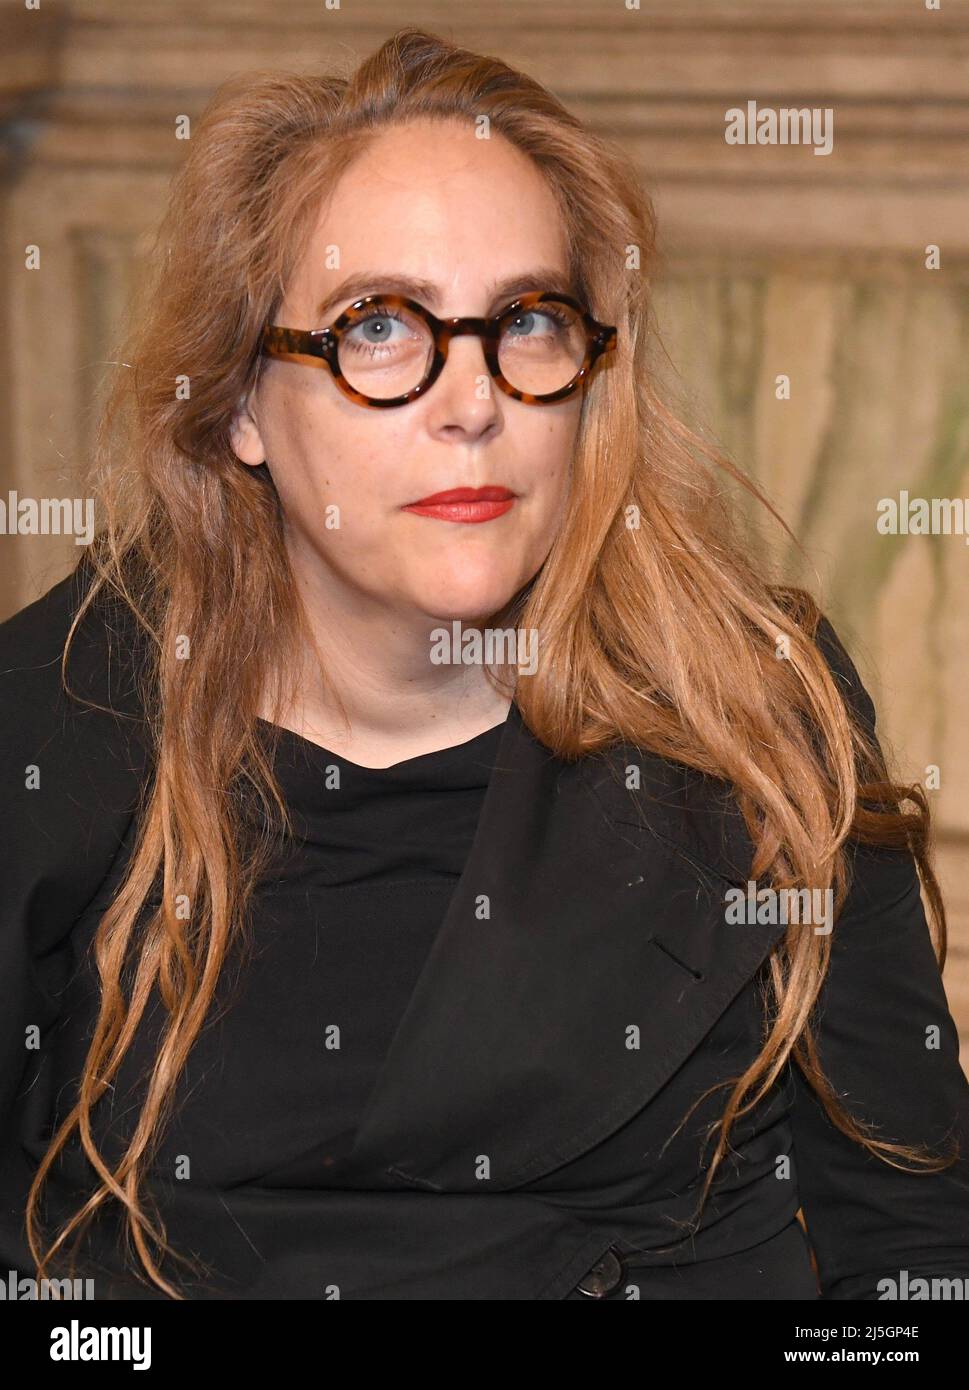 Venedig, Italy. 23rd Apr, 2022. Susanne Pfeffer, Director of the Frankfurt Museum of Modern Art, and member of the jury of the 59th Arte Biennale, photographed before the opening of the 59th Arte Biennale. The biennial Arte Biennale is regarded worldwide as the oldest and, after the documenta in Kassel, the most important international forum for contemporary visual art. Credit: Felix Hörhager/dpa/Alamy Live News Stock Photo